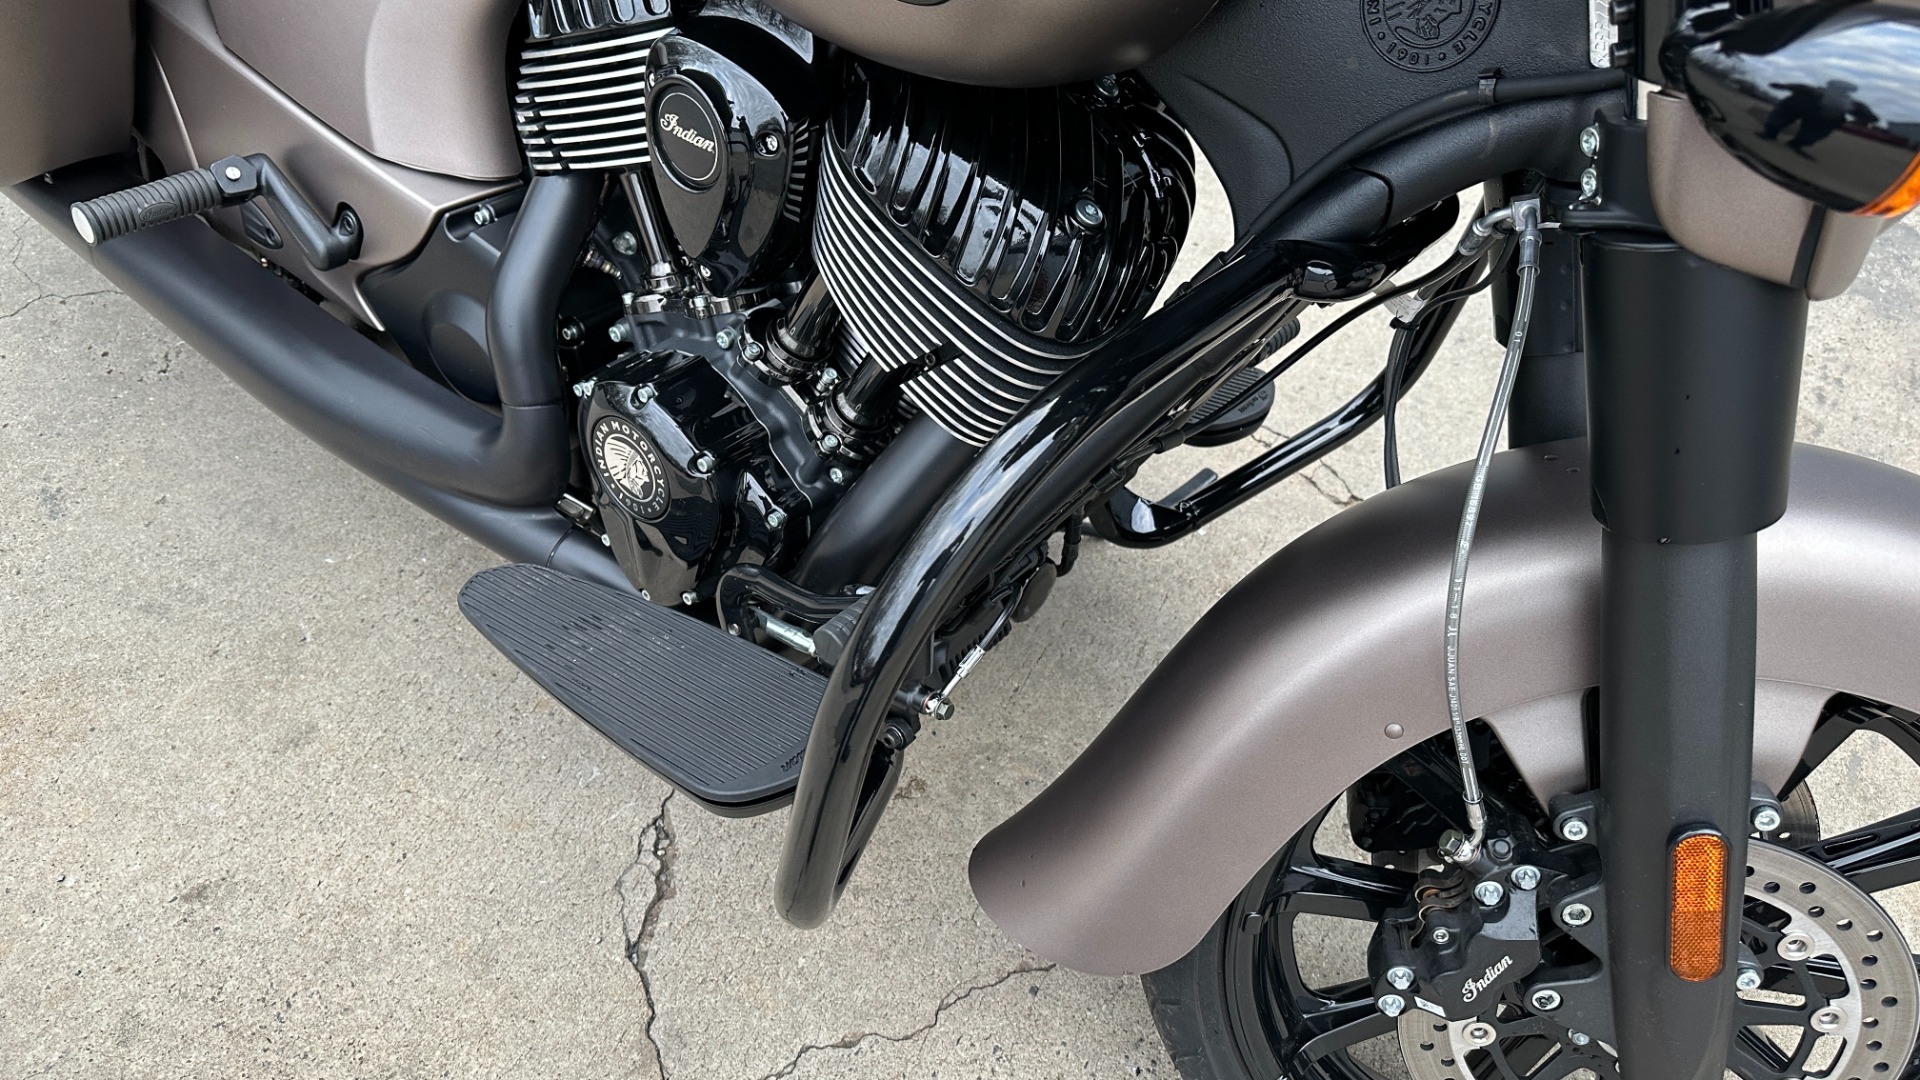 Used 2019 INDIAN CHIEFTAIN DARK HORSE / MATTE PAINT / LOW MILES / NAV / CRUISE CONTROL / TOUCHSCREEN for sale $23,999 at Formula Imports in Charlotte NC 28227 27